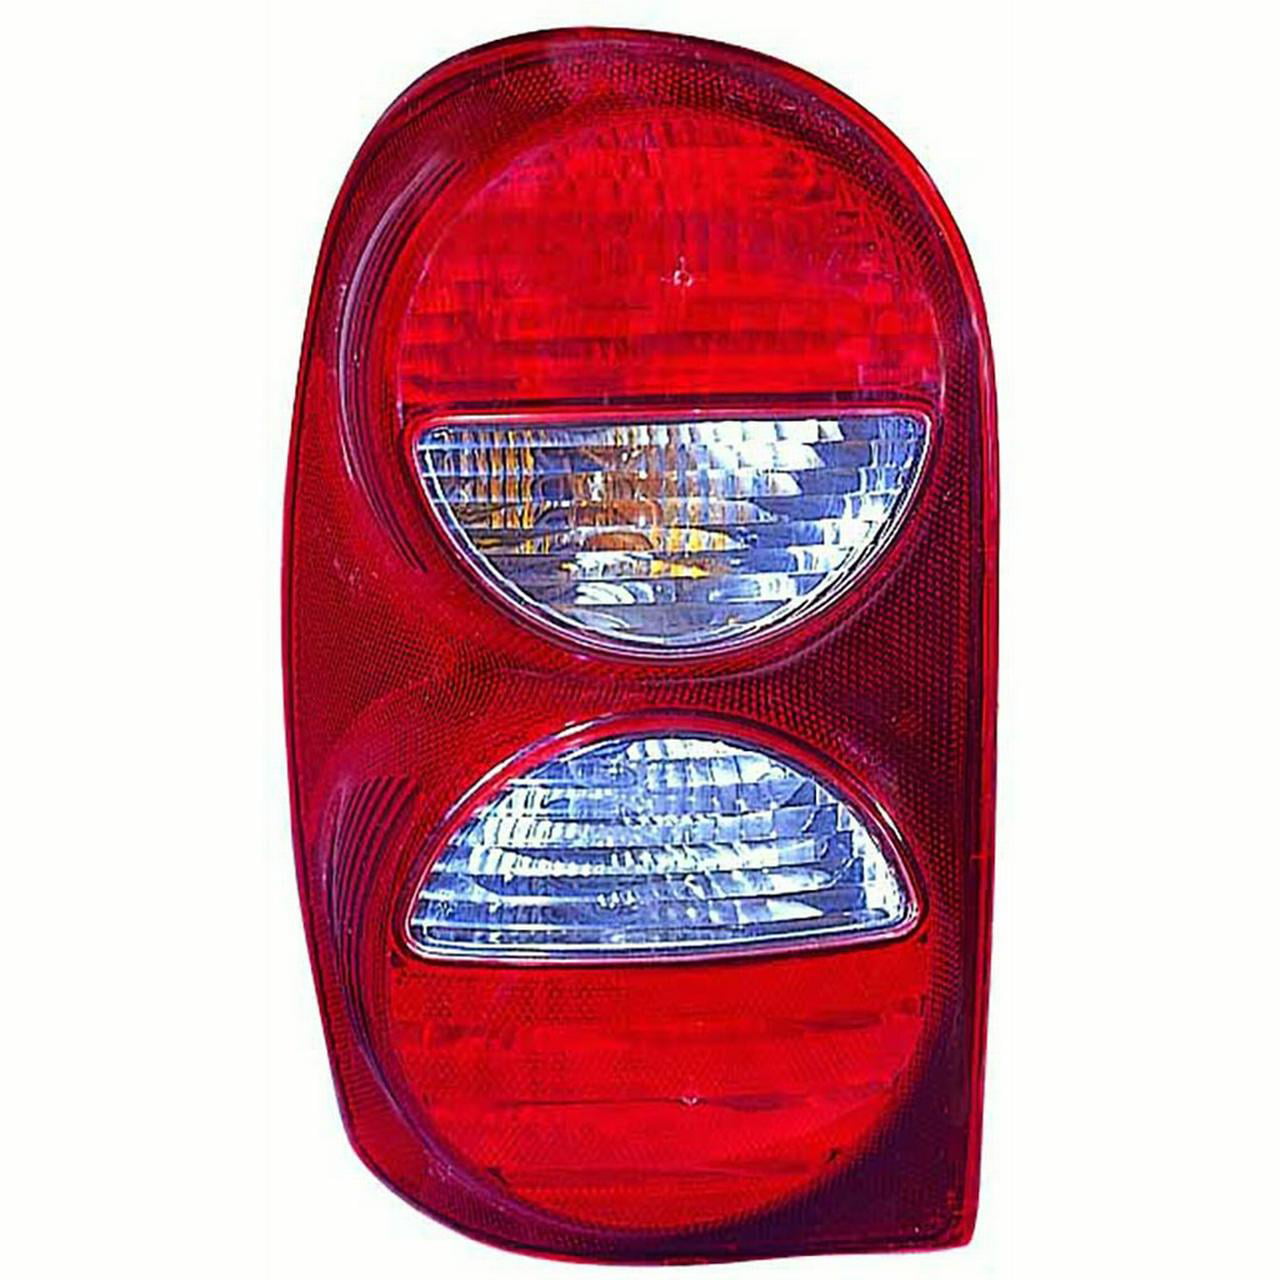 CarLights360 For 2005 2006 2007 JEEP LIBERTY Tail Light